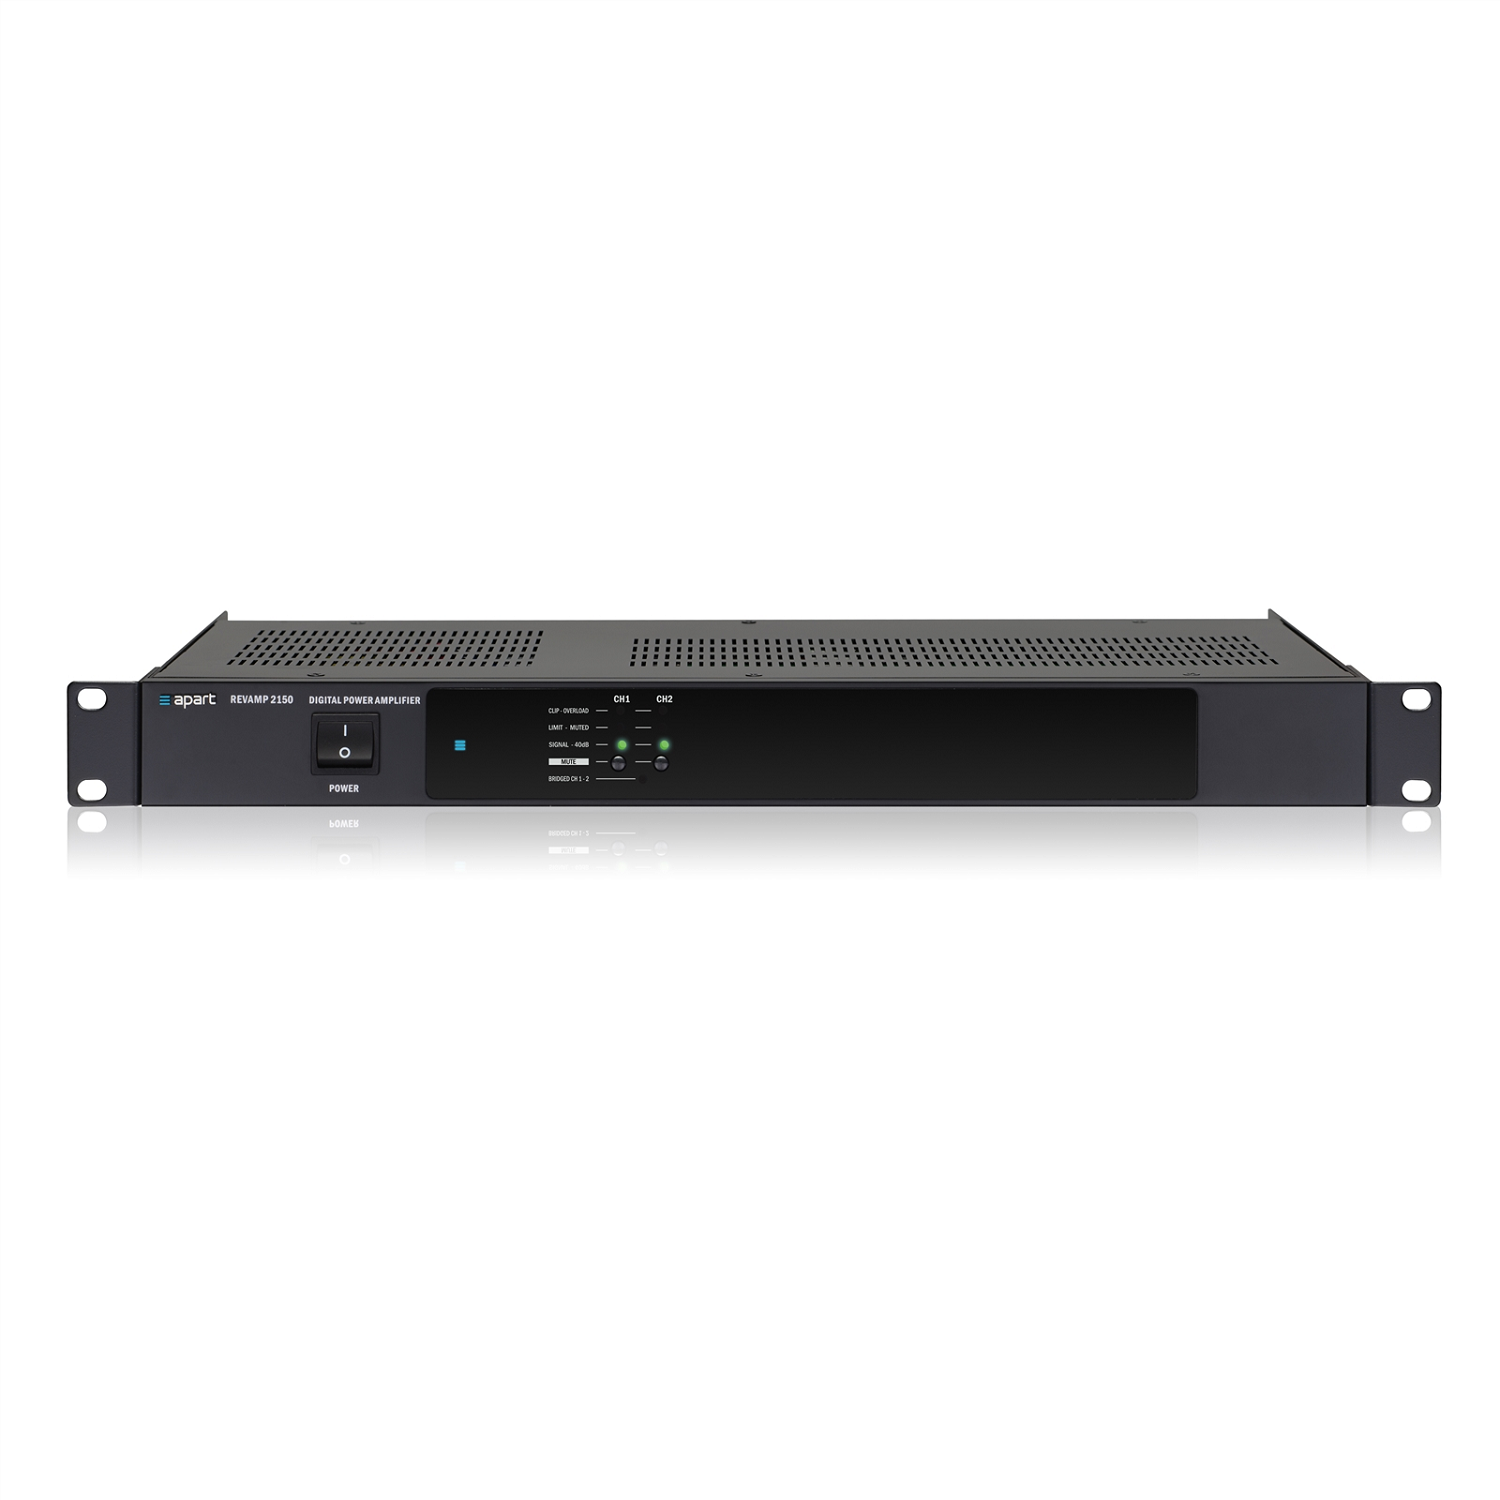 2 Channel class D amplifier 2 x 150 Watts (RMS @ 4 Ohms), 2 x 165 Watts (Dynamic @ 4 Ohms) or in bridge mode 1 x 300 Watts (RMS @ 8 Ohms), Convection Cooled, 1 U, 19&quot; rackmount , REVAMP2150 , APART